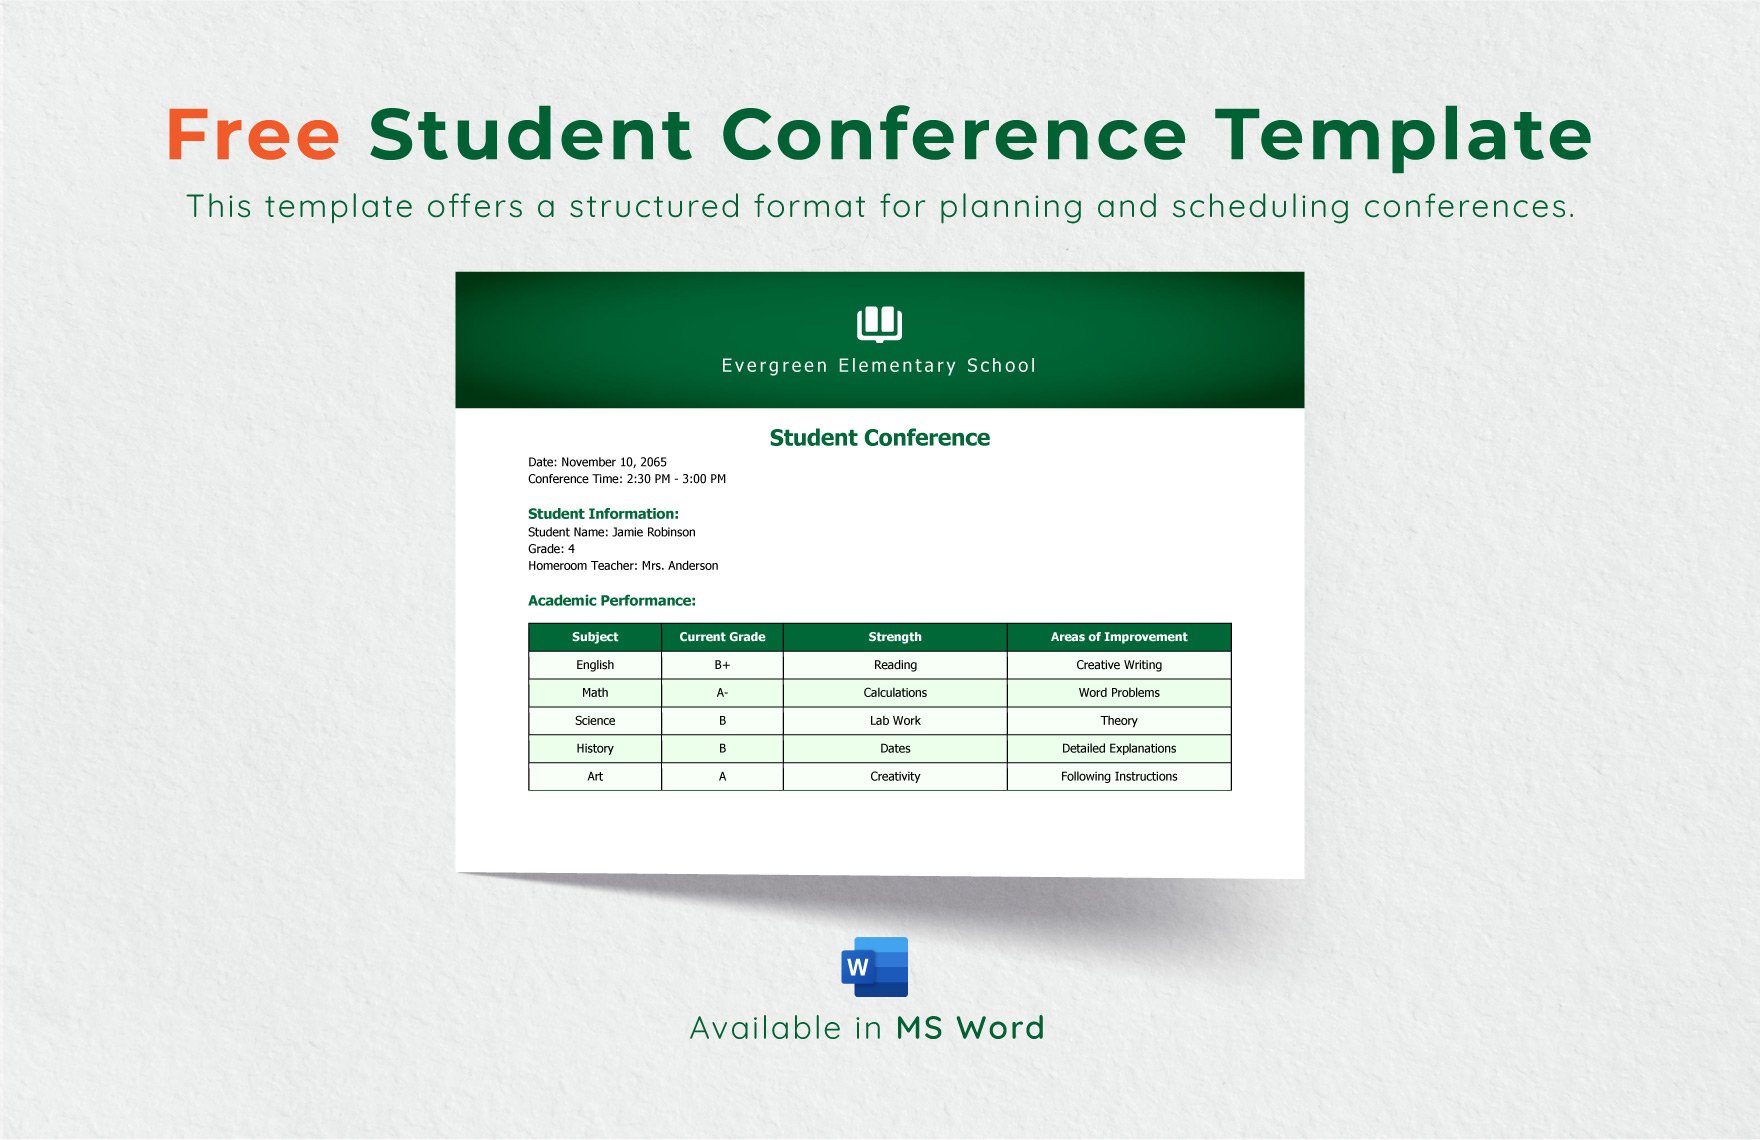 Free Student Conference Template in Word